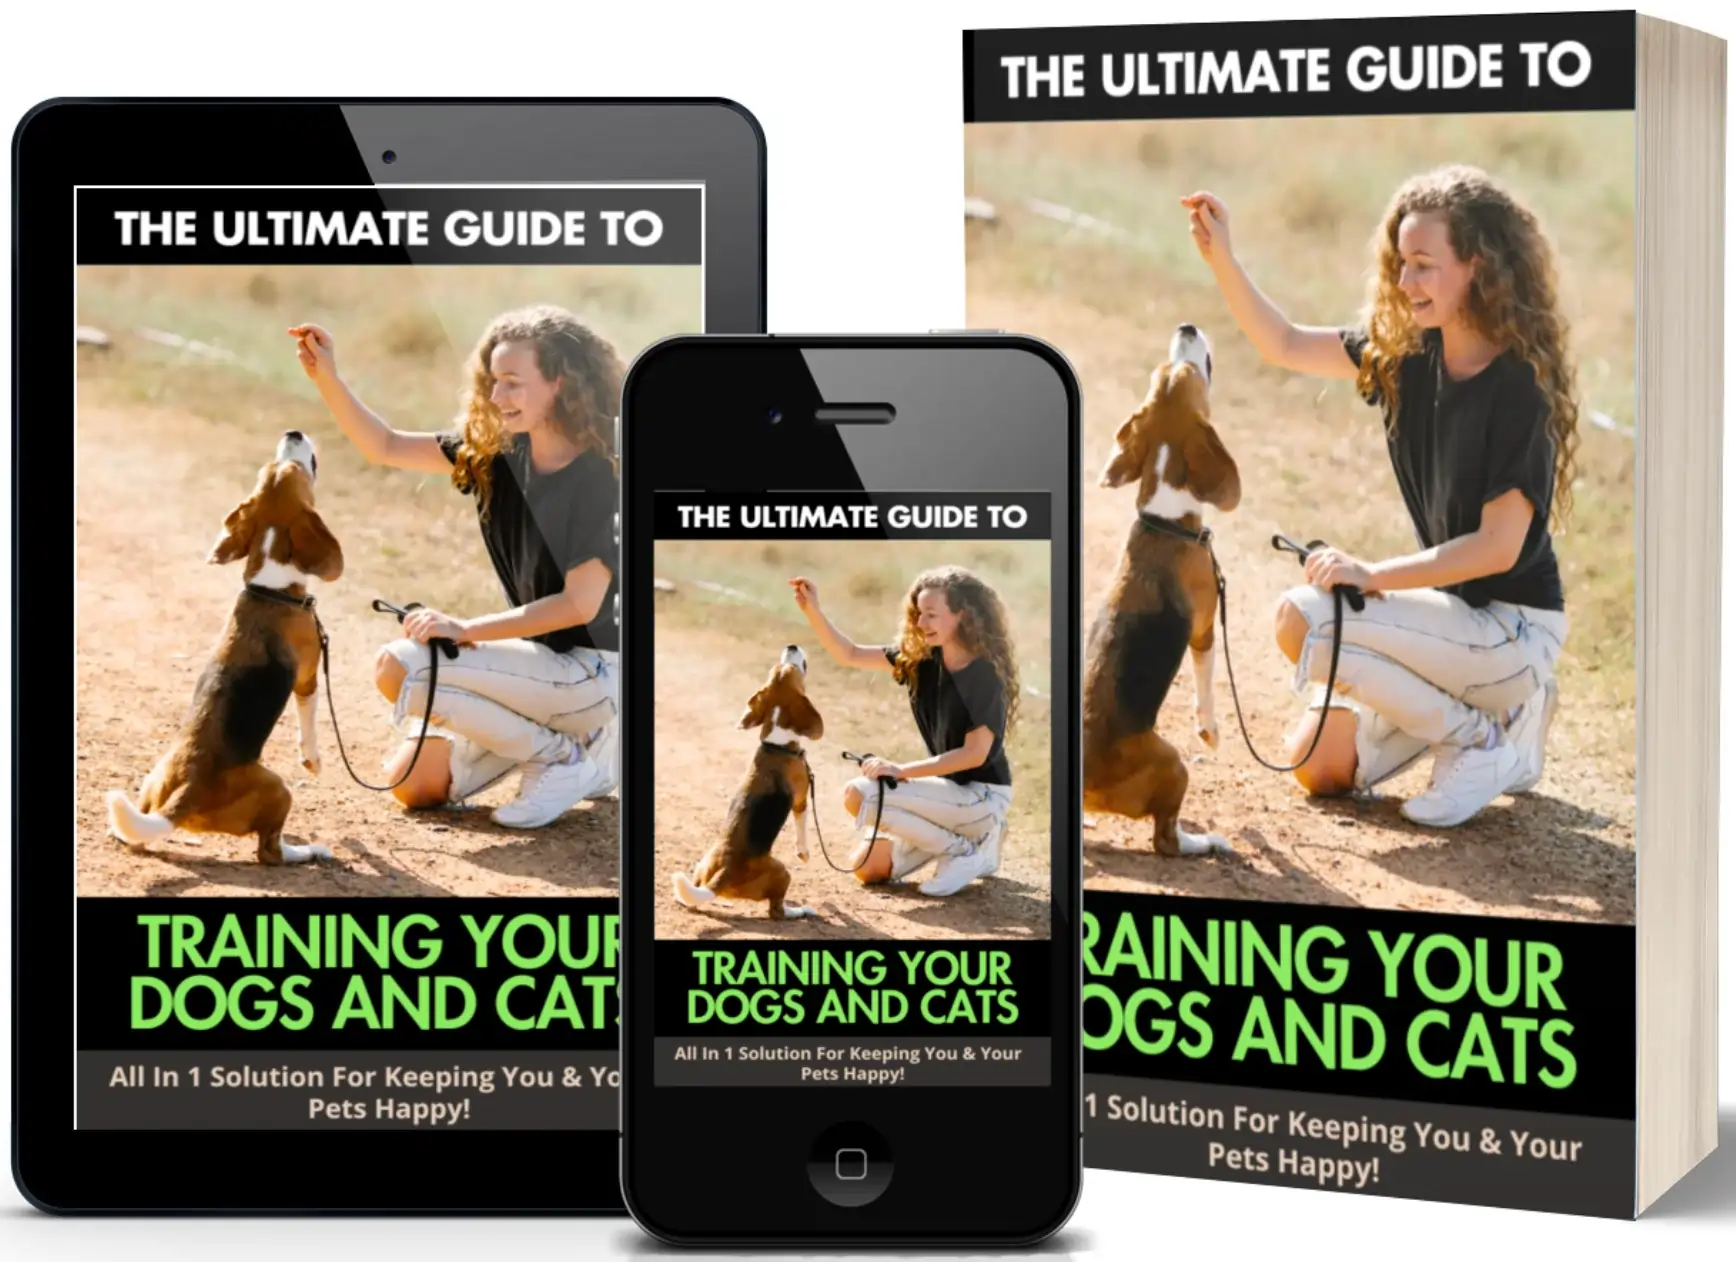 Unleashing Pet Harmony - A Review of "Training Your Dogs And Cats"